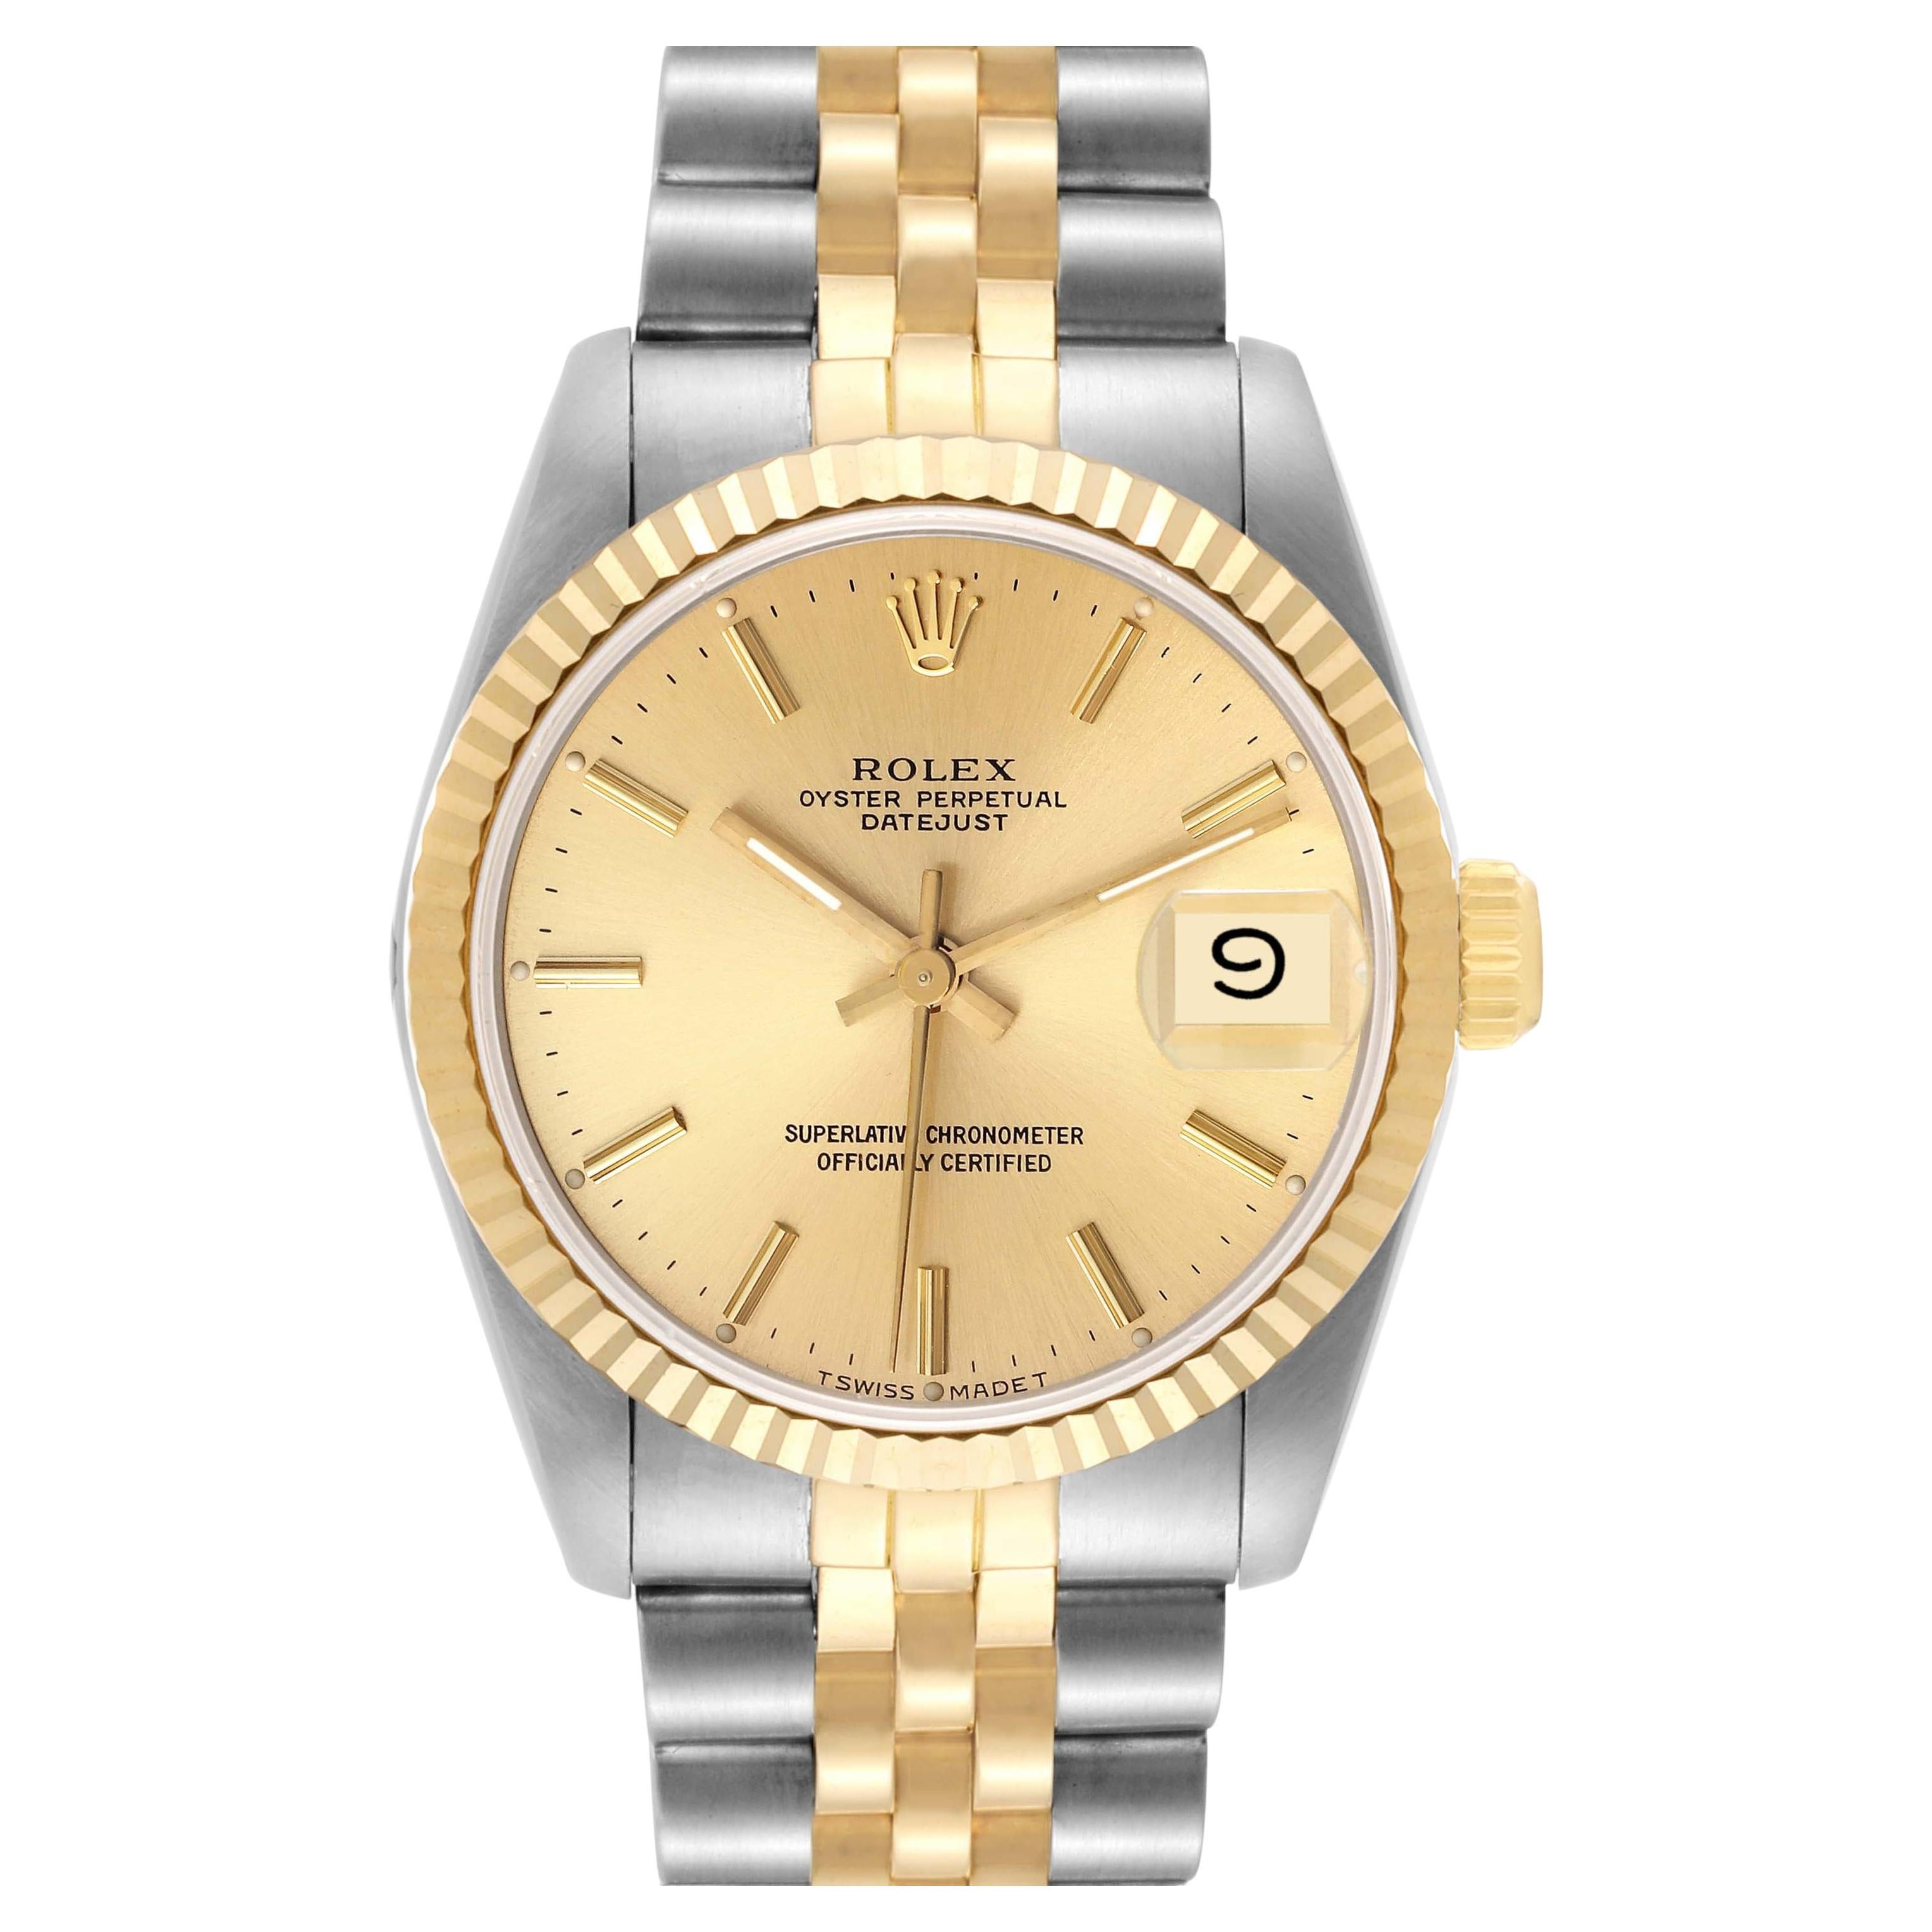 Rolex Datejust Midsize Champagne Dial Steel Yellow Gold Ladies Watch 68273